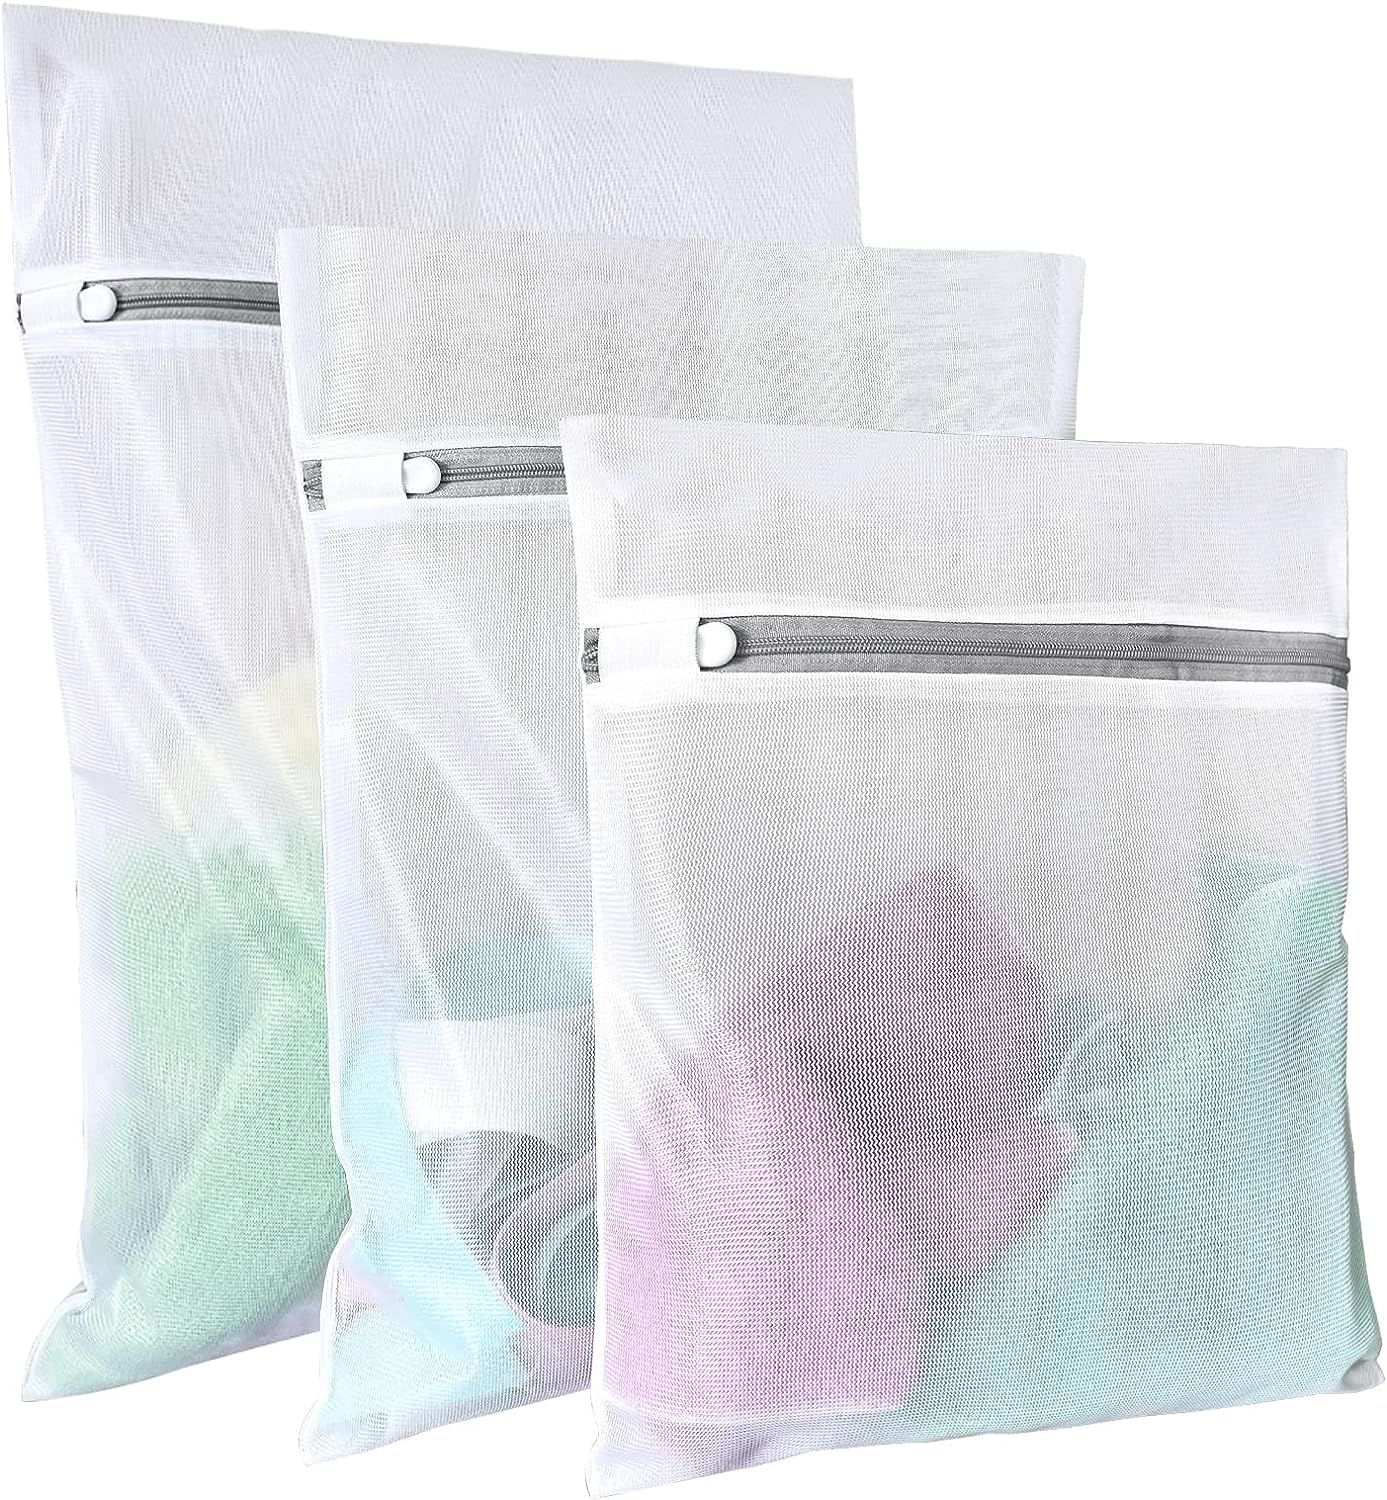 Lingerie Bags for Washing Delicates,Small Fine Mesh Laundry Bags,3Pcs(1 Large,1 Medium,1 Small) | Amazon (US)